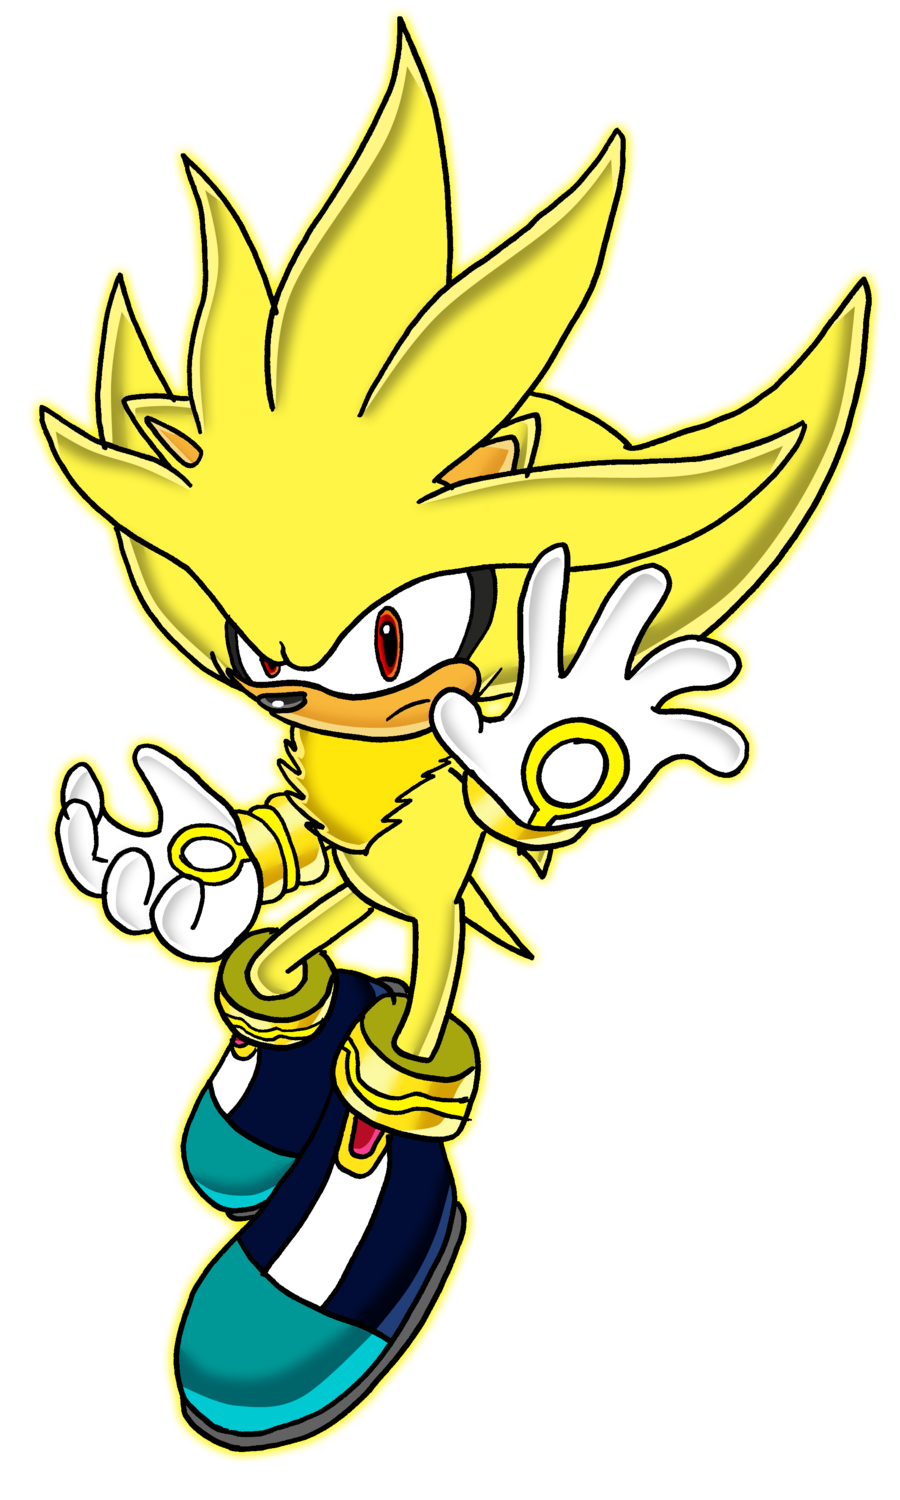 Super Silver Drawing Silver The Hedgehog Photo 36777053 Fanpop